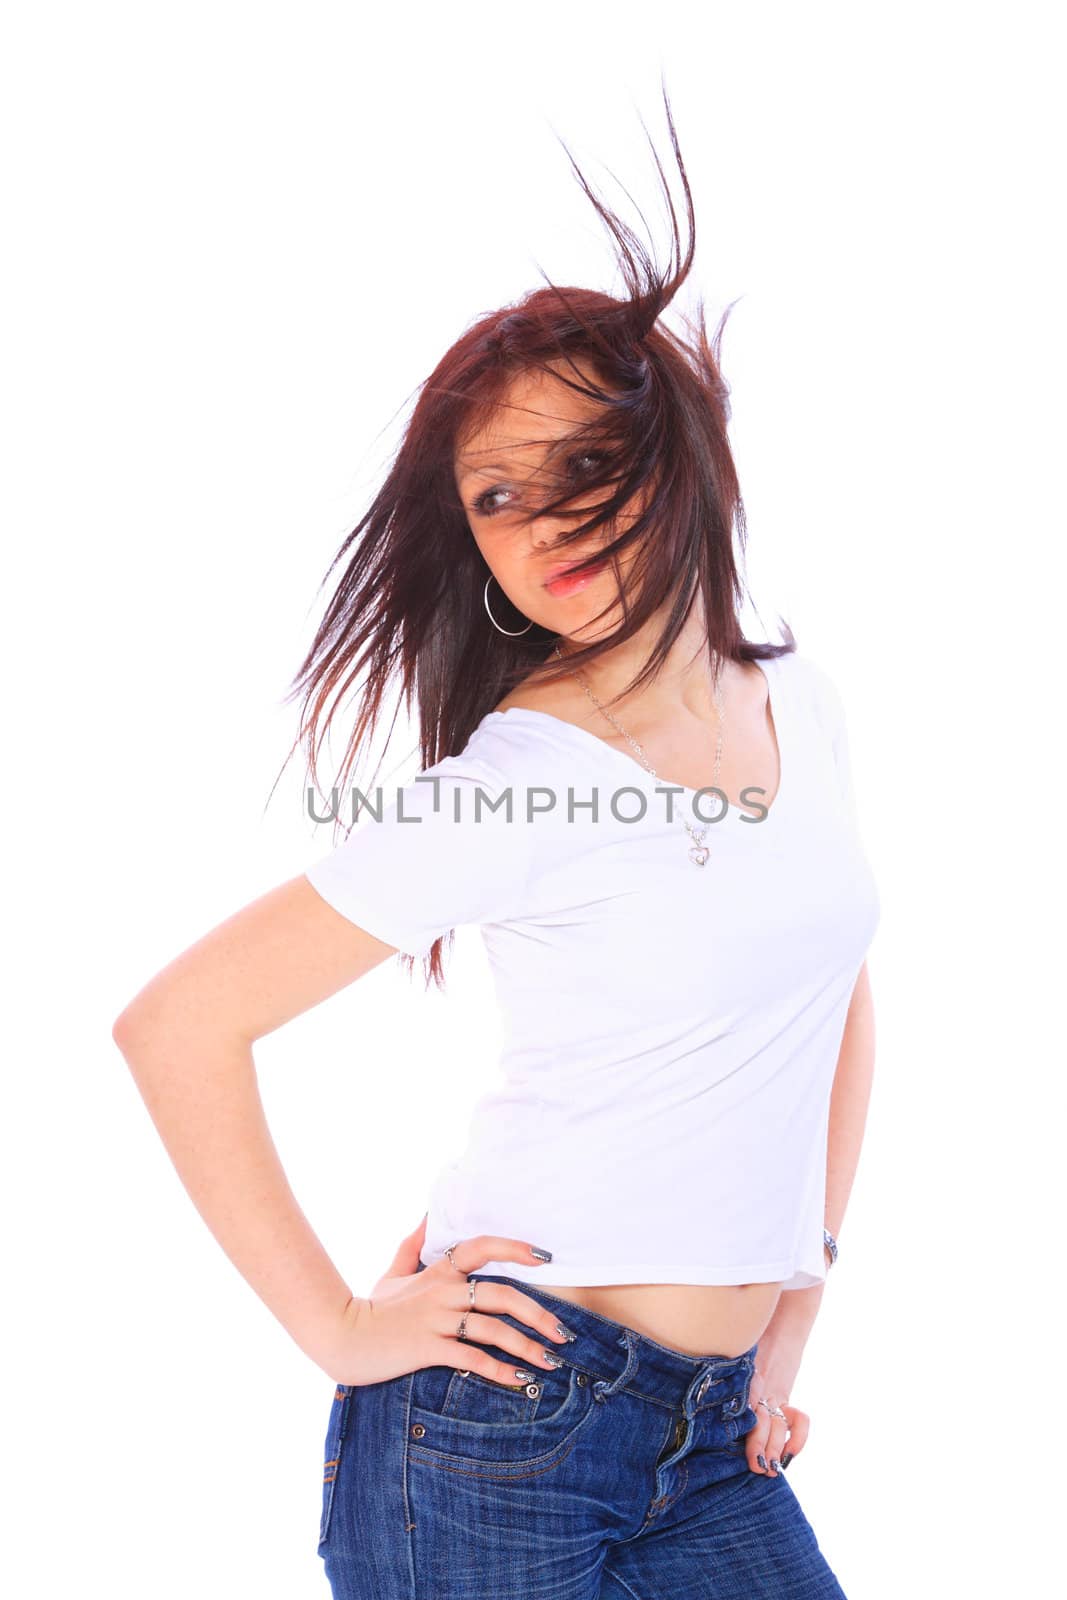 smiling young woman in jeans and t shirt, studioshot over white background